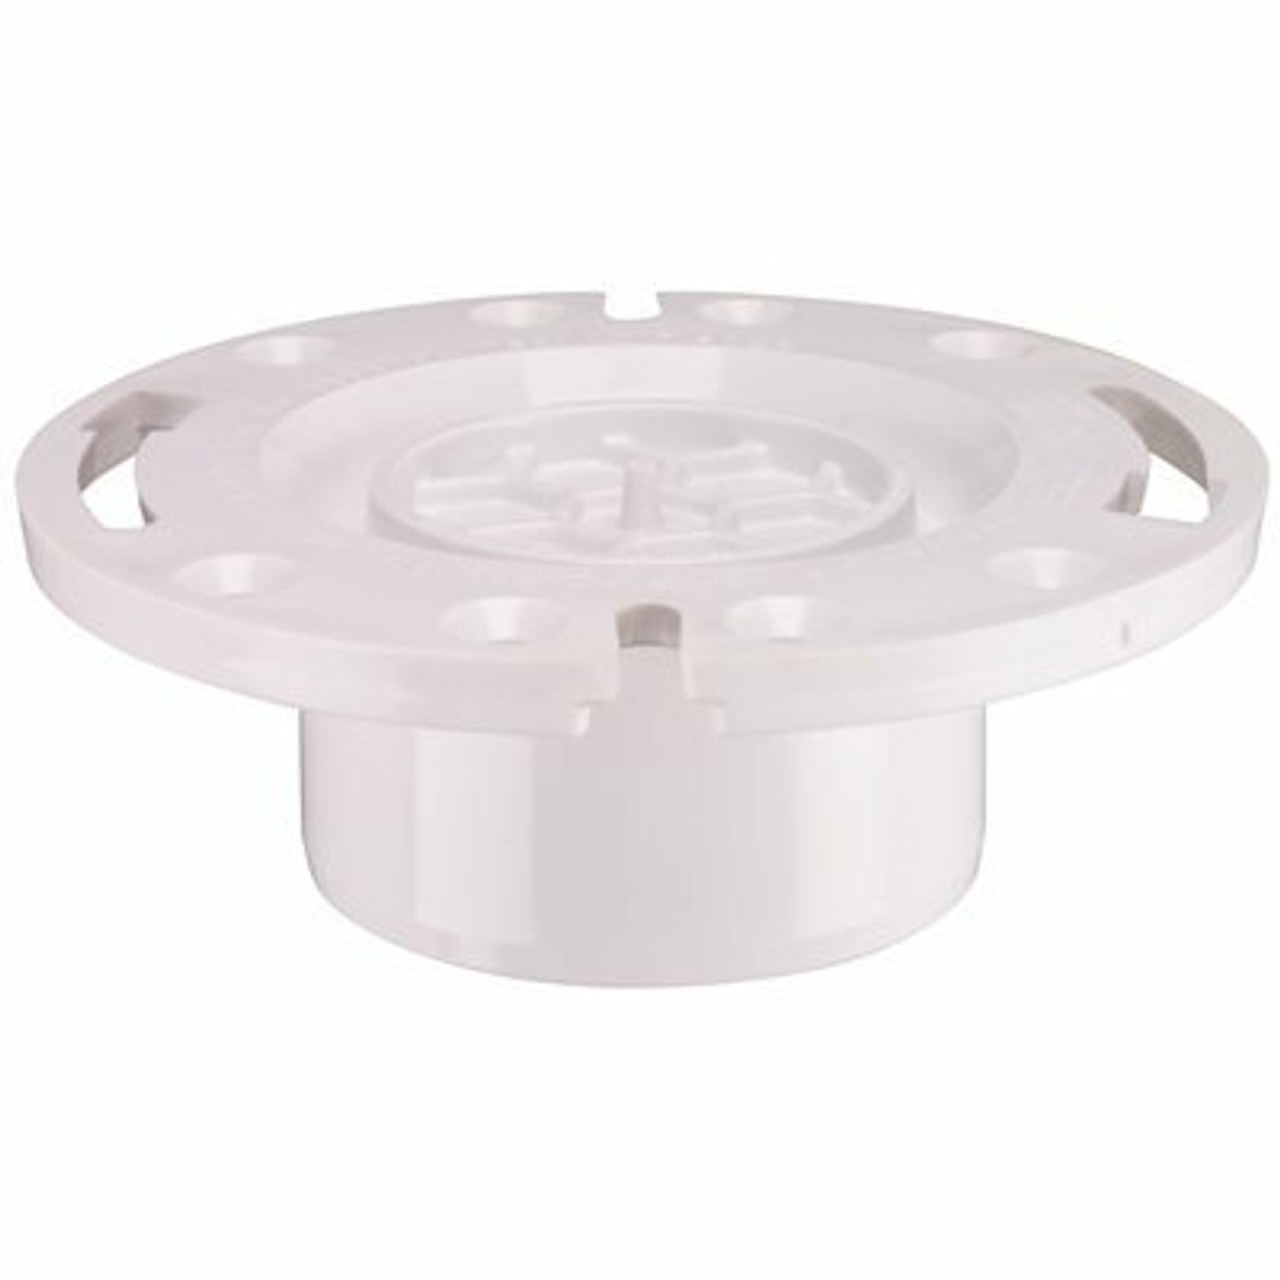 Water-Tite Techno Plastic Closet Flange For 3 In. Or 4 In. Pvc Pipe